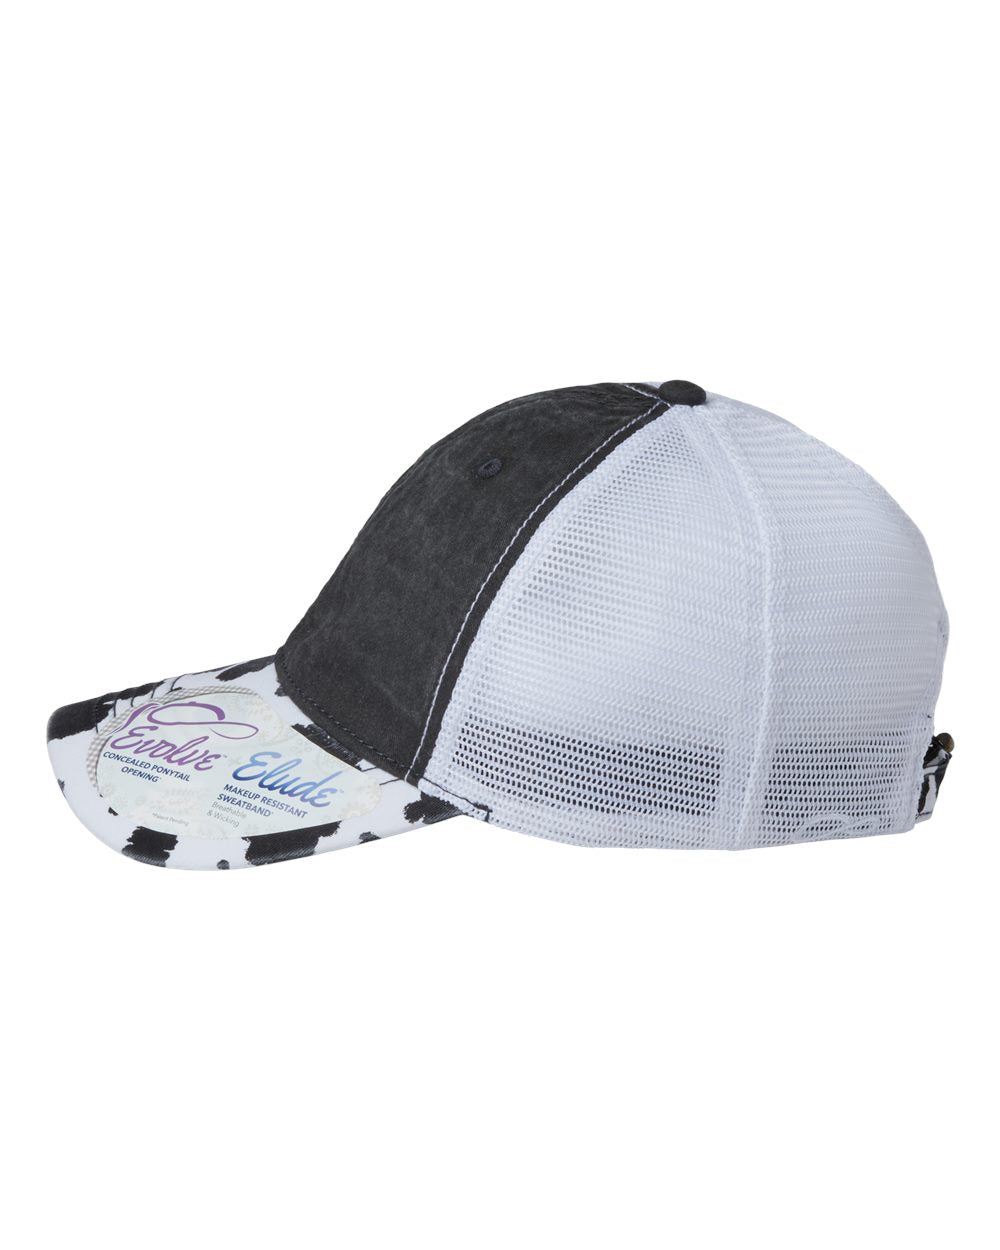 A women's printed visor with mesh back cap in black, featuring cow print on the visor and white mesh back.